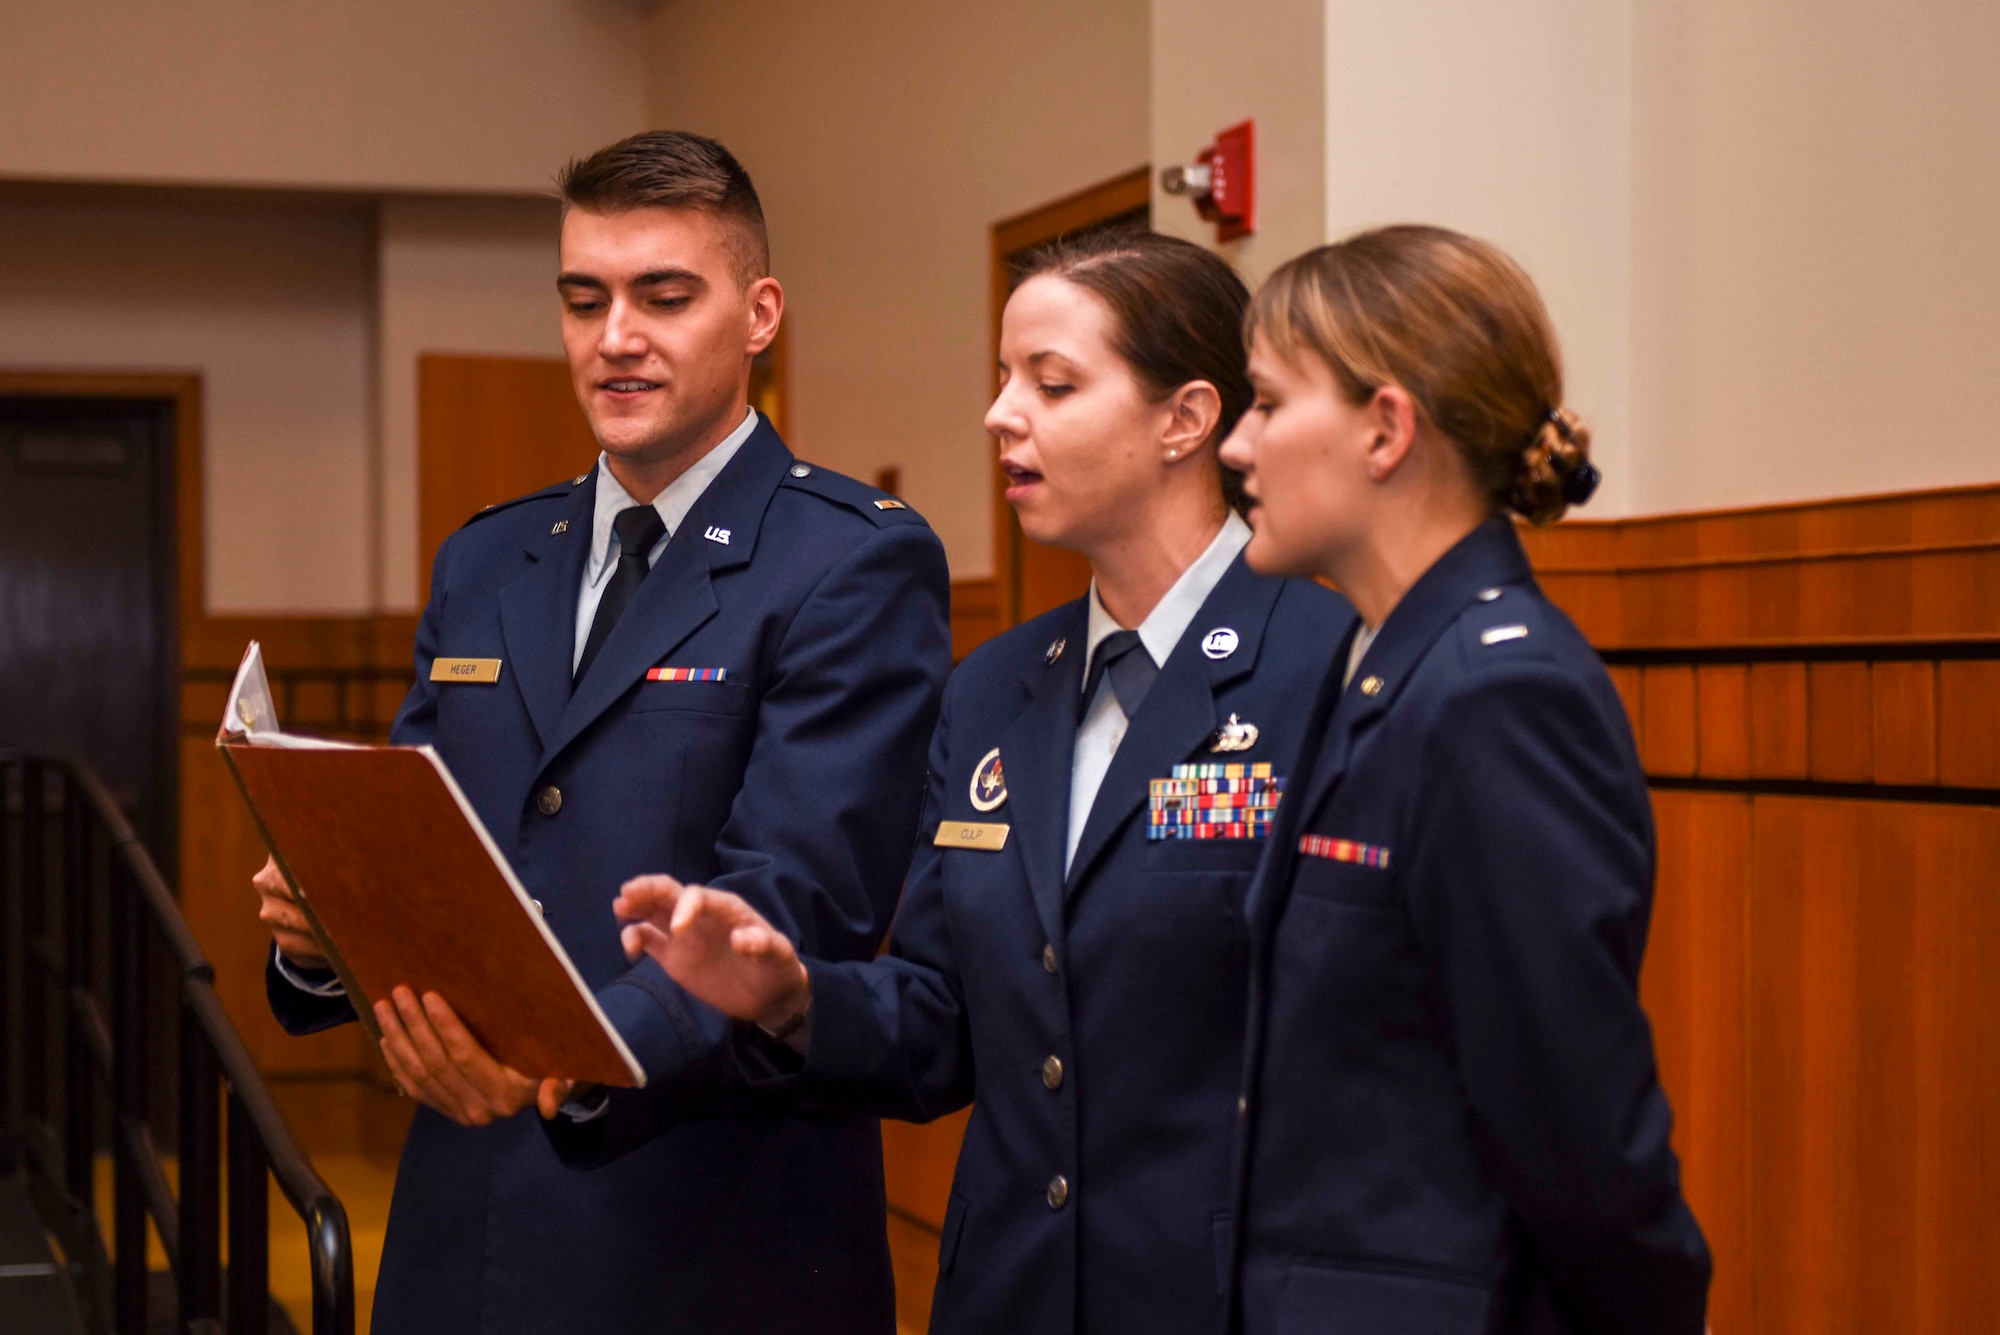 Members of Patriotic Blue, 2nd Lt. Alexander Heger, 315th Training Squadron student, TSgt Starla Culp, 315th TRS instructor, and 1st Lt Kaitlyn Sprague, 315th TRS student, sing “America the Beautiful” during the naturalization ceremony held at the CJ Davidson Center on Angelo State University, San Angelo, Texas. The ceremony naturalized 76 individuals from 13 different countries.  (U.S. Air Force photo by Aryn Lockhart/Released)